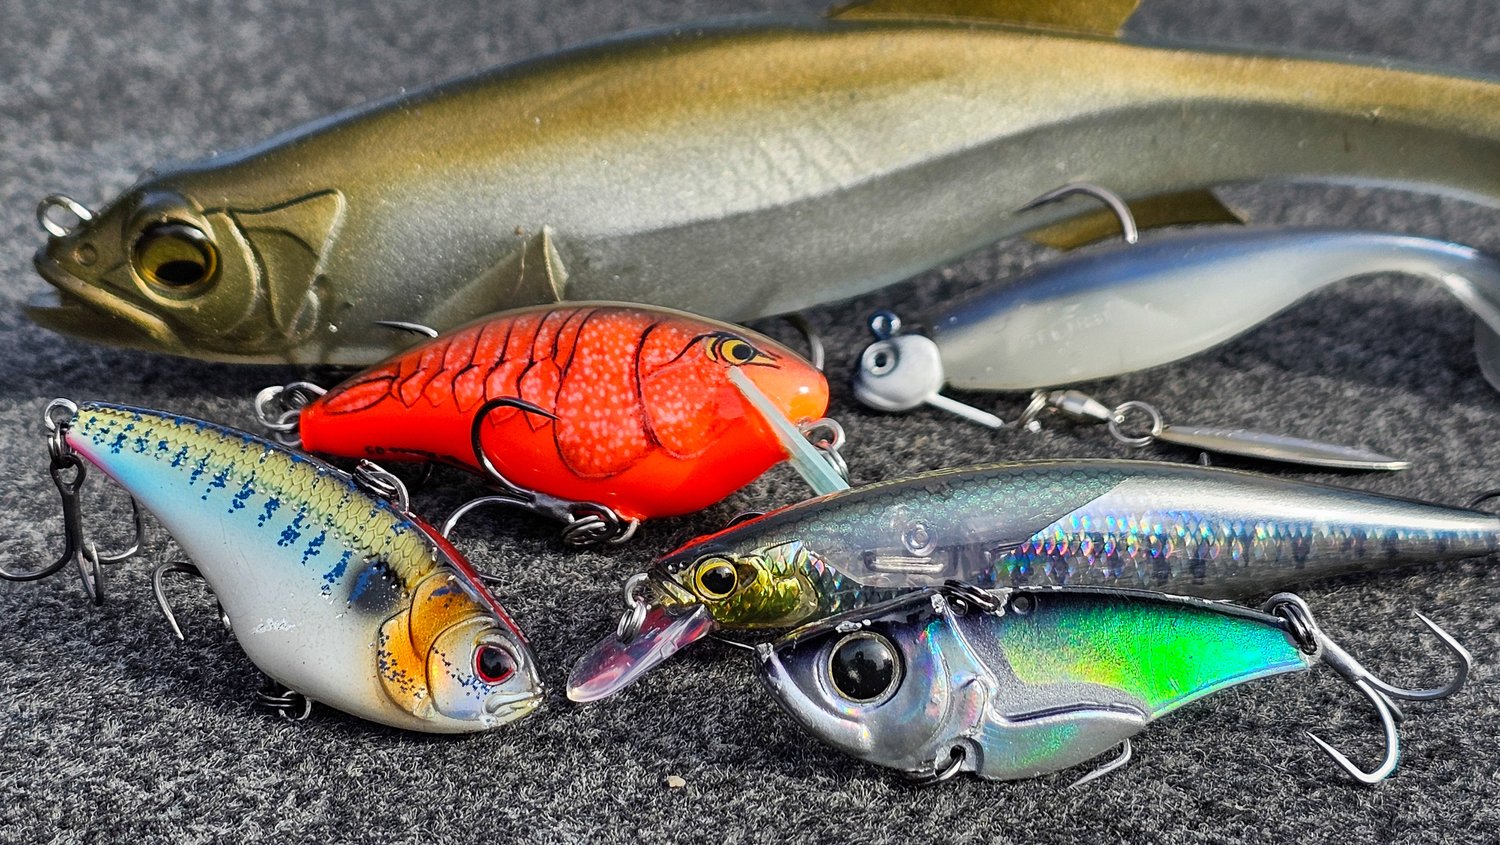 Top 5 Baits For February Bass Fishing! — Tactical Bassin' - Bass